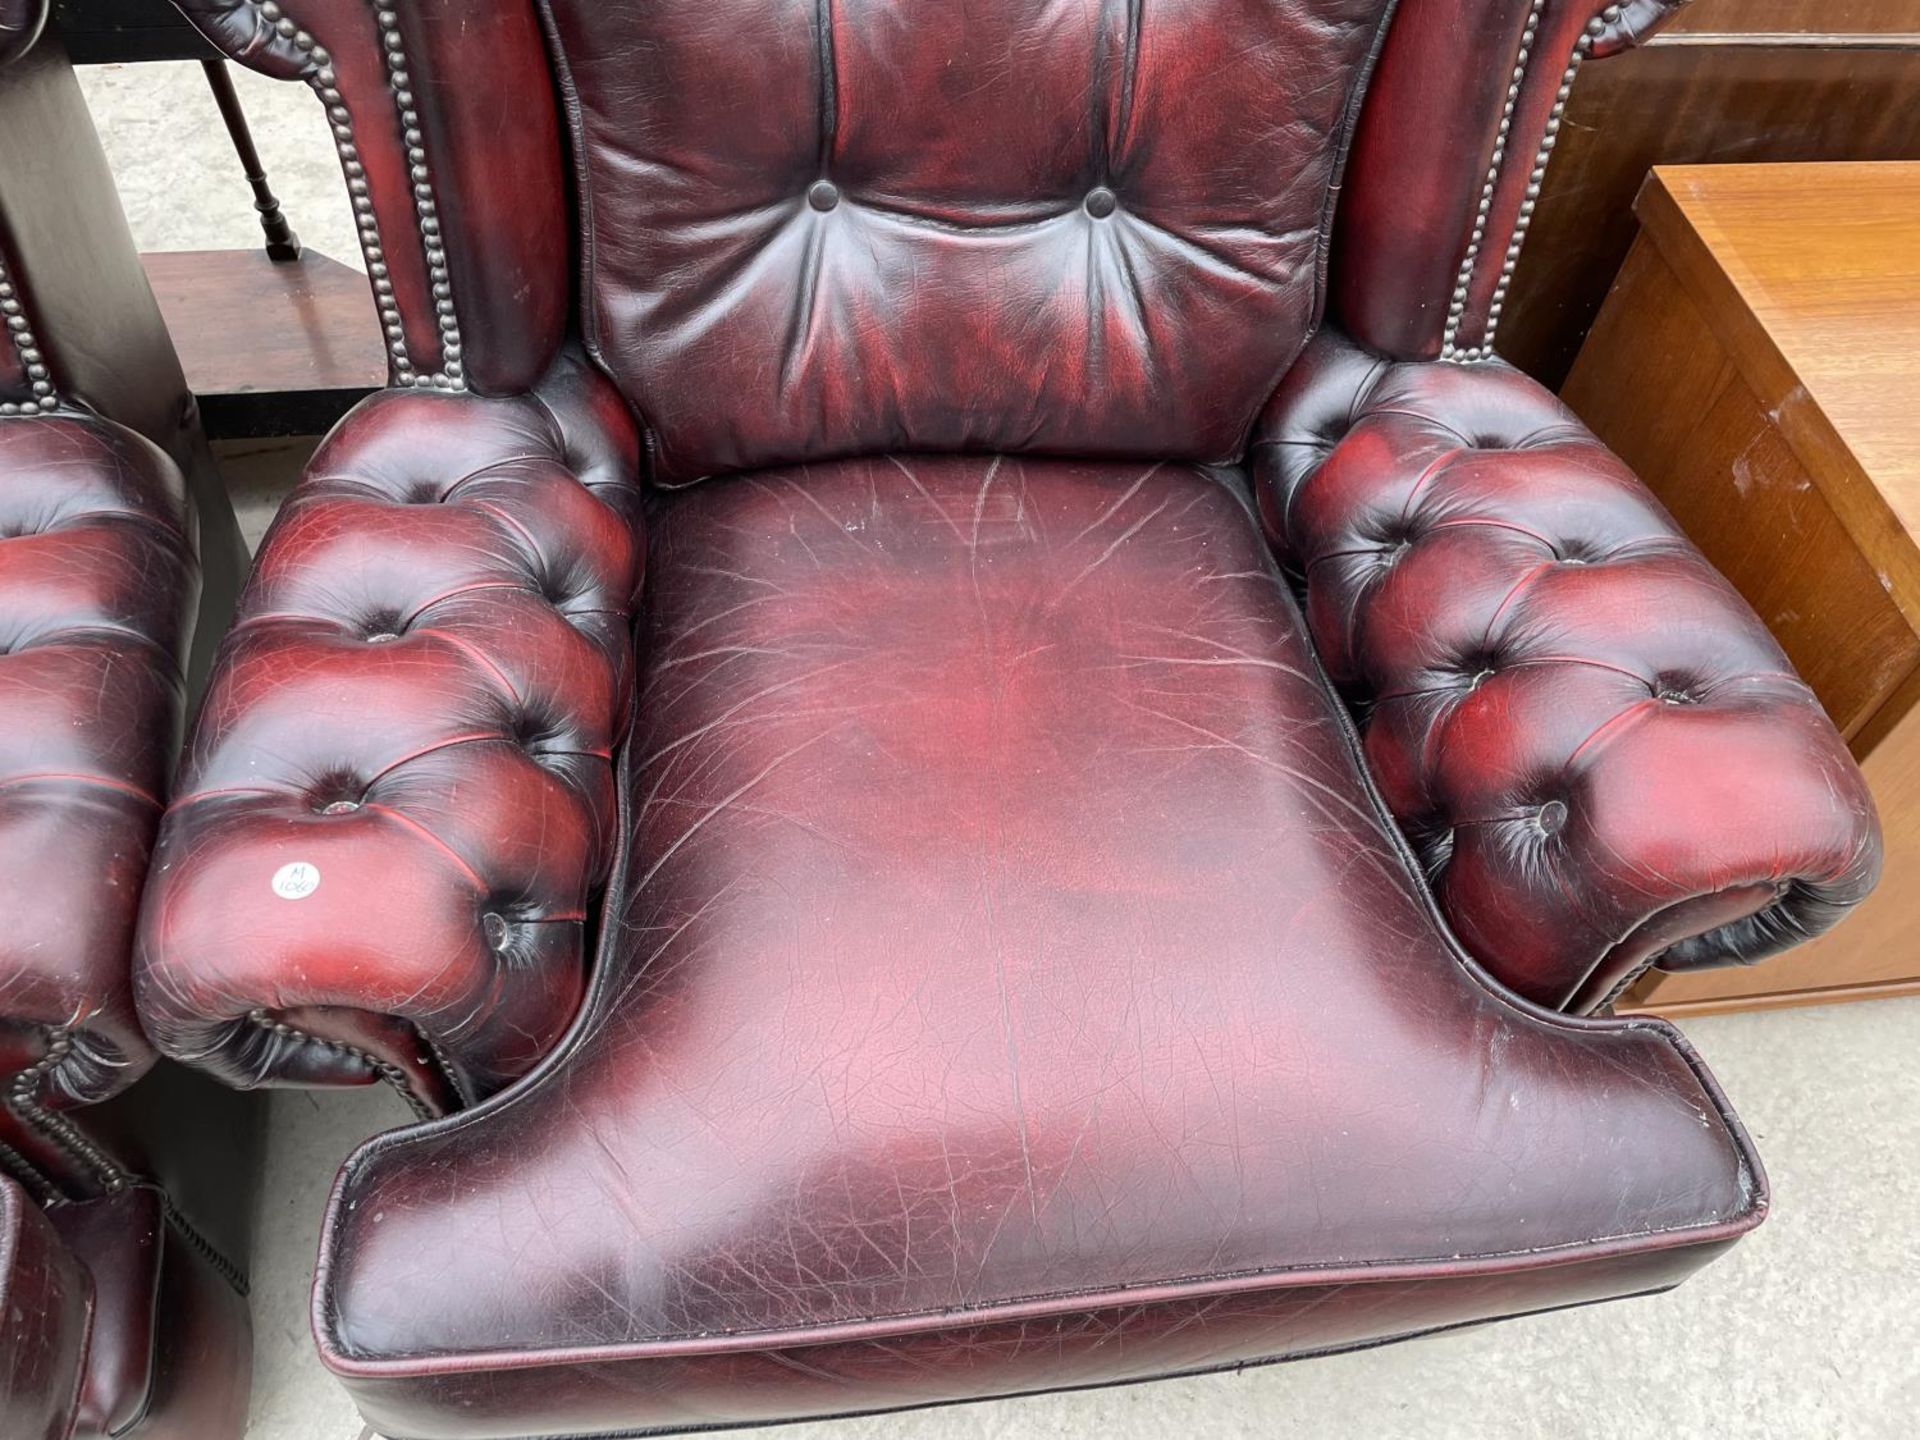 TWO OXBLOOD LEATHER ARMCHAIRS WITH BUTTONED BACK AND ARMS - Image 6 of 7